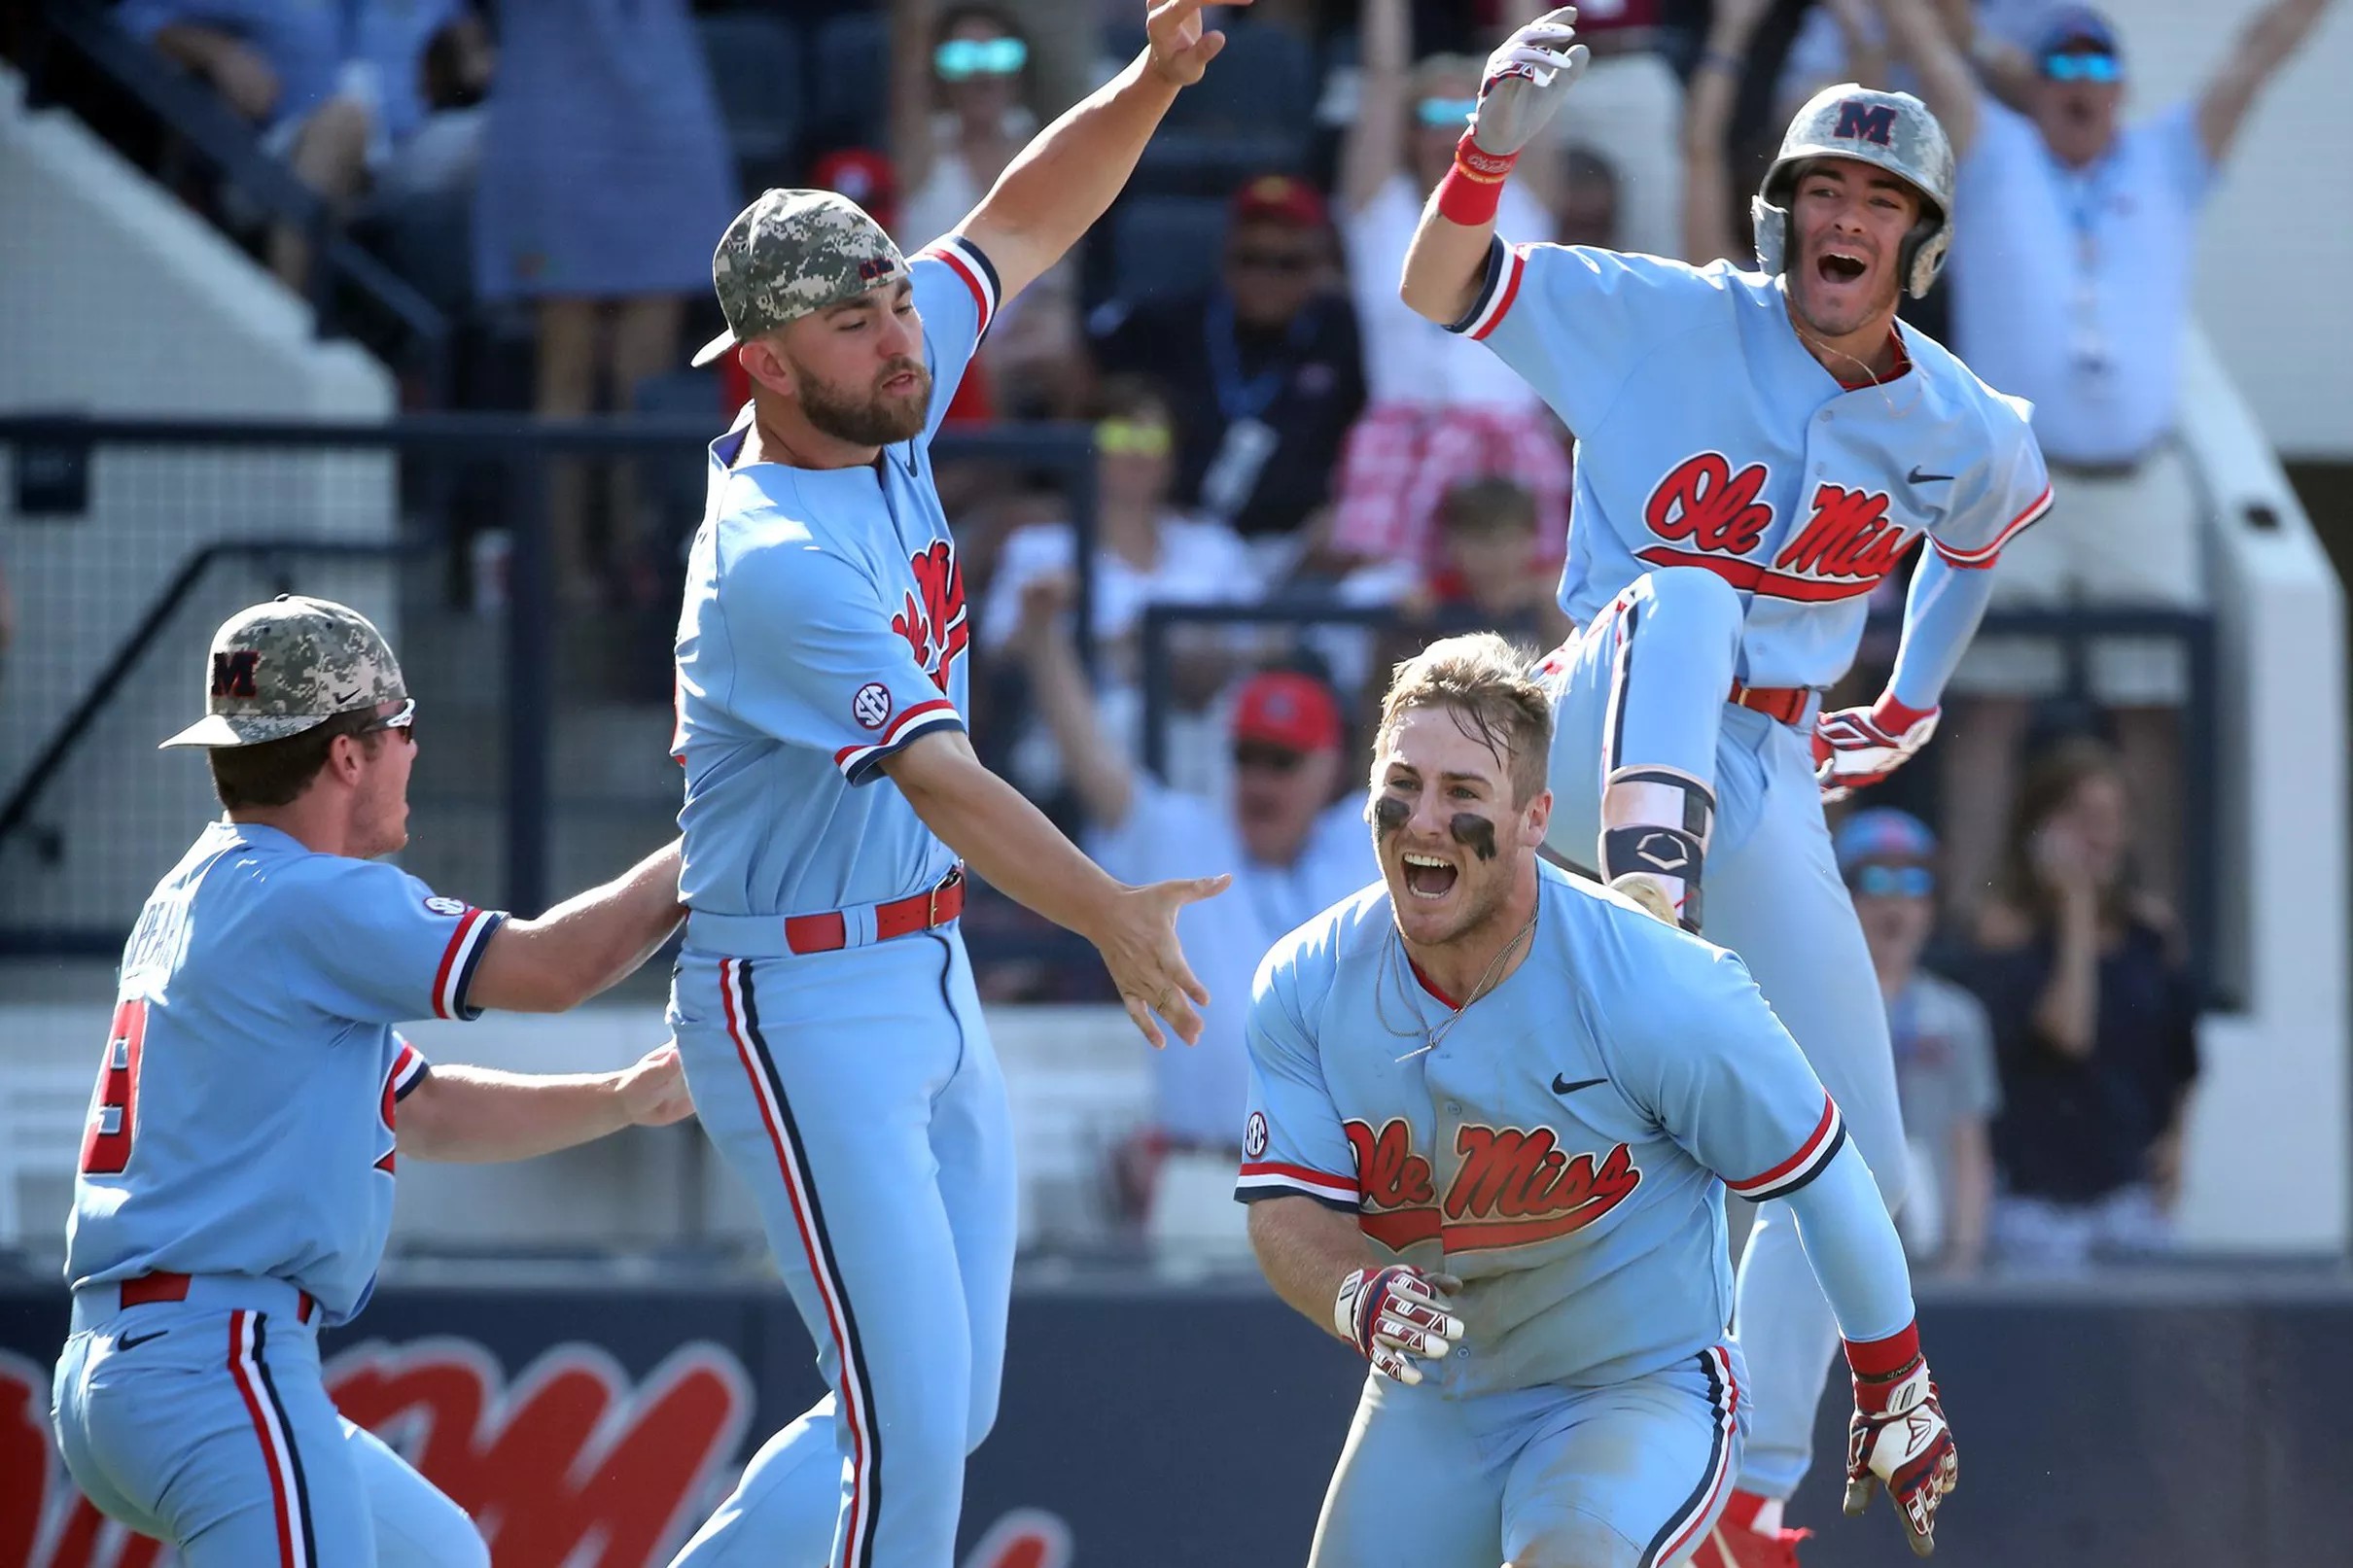 Ole Miss baseball invades Hattiesburg to face Southern Miss